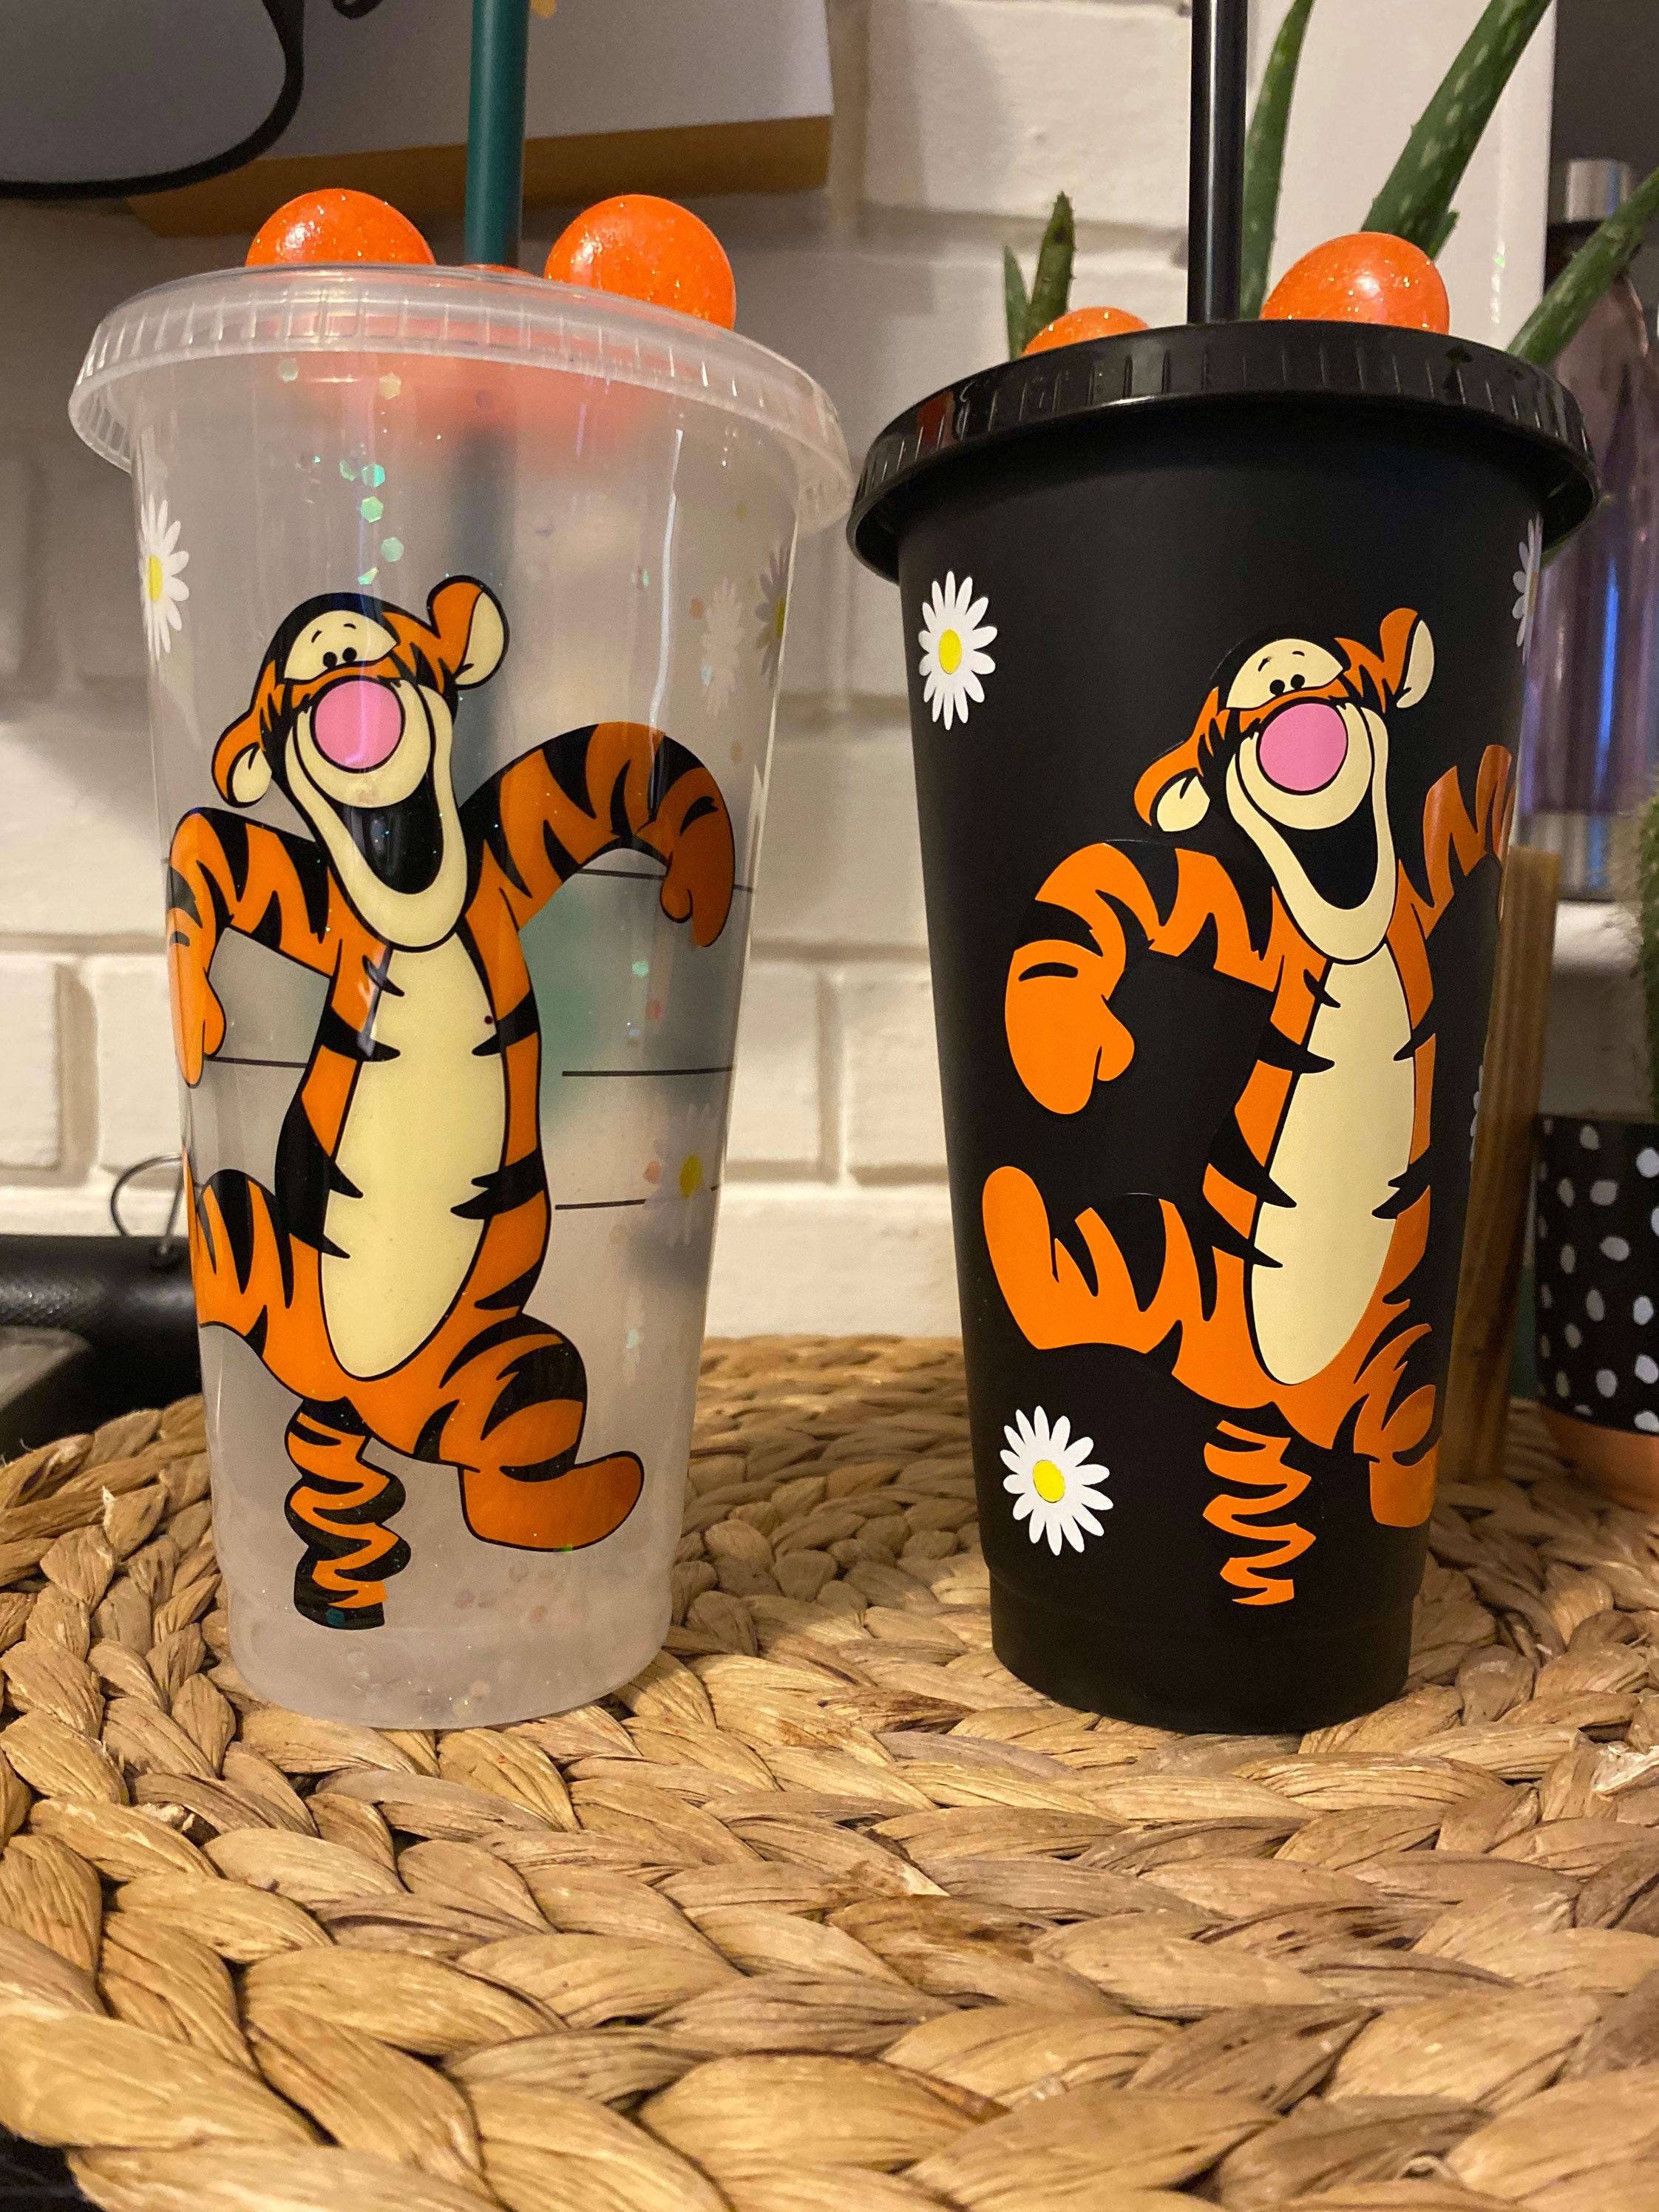 WALT DISNEY WORLD Plastic Tumbler with Cover and Straw Winnie The Pooh  EYEORE